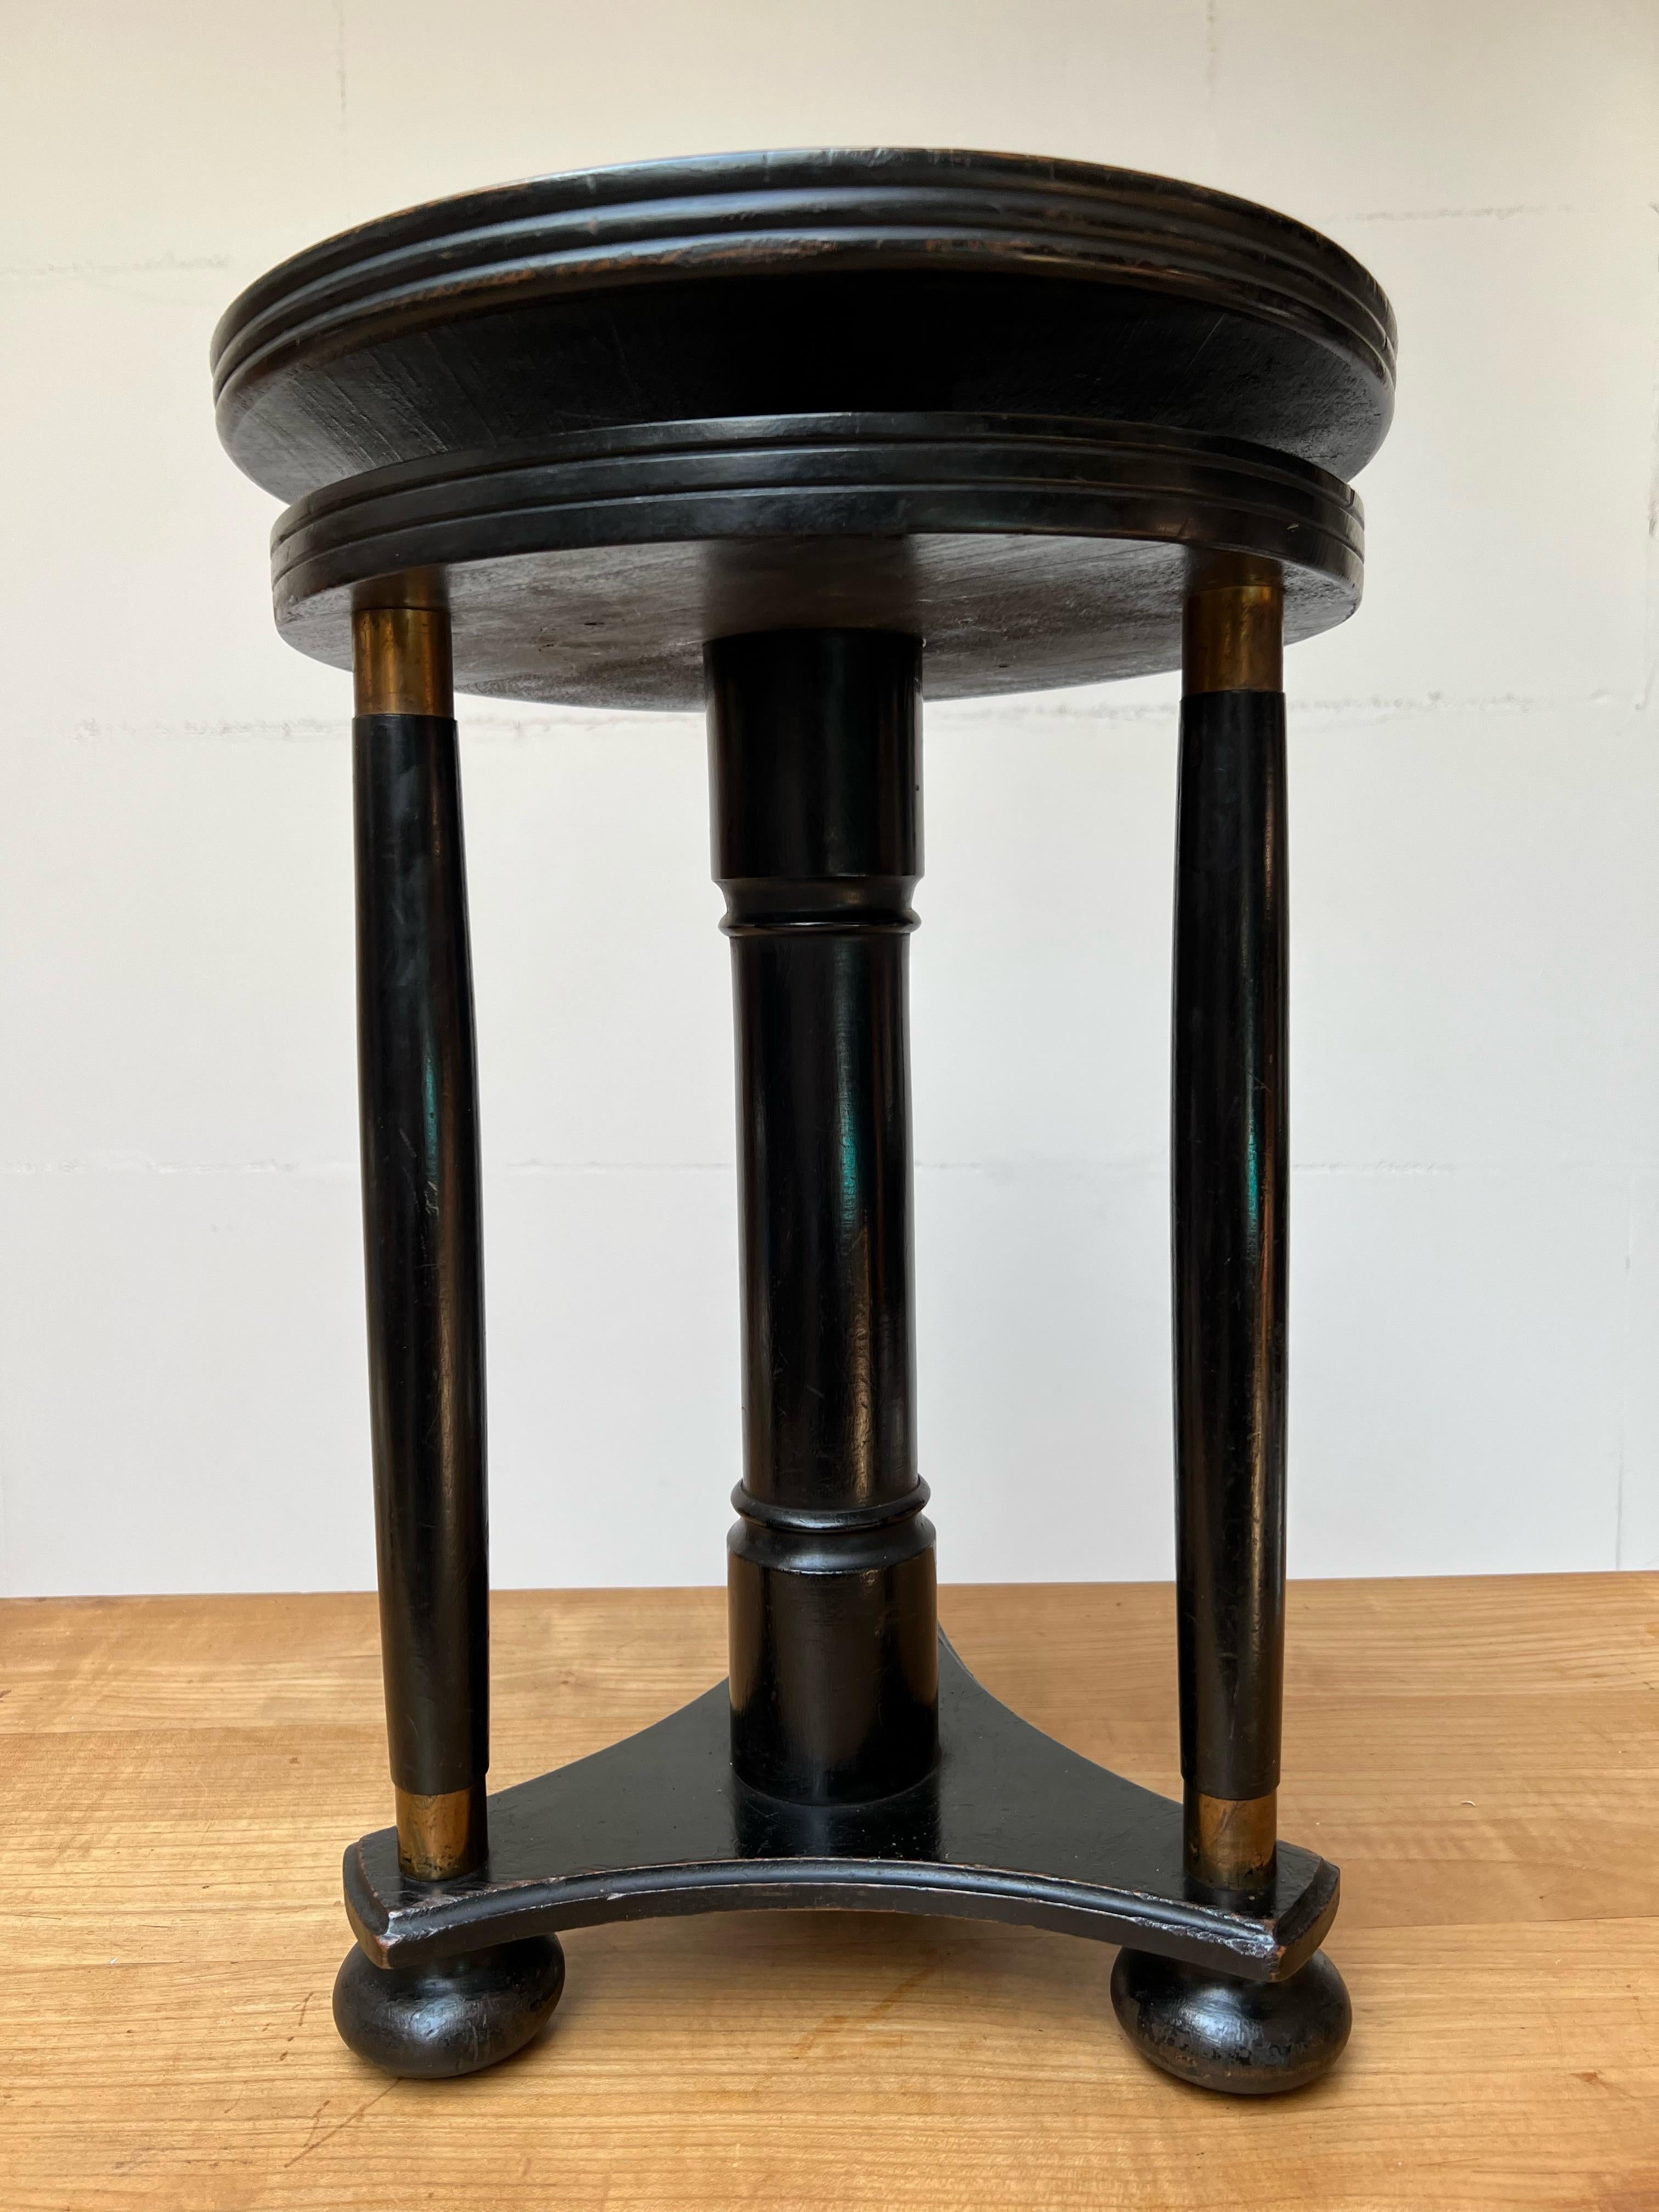 Stylish Blackened Wooden and Brass Art Deco Desk or Piano Swivel Stool, ca 1900 For Sale 1